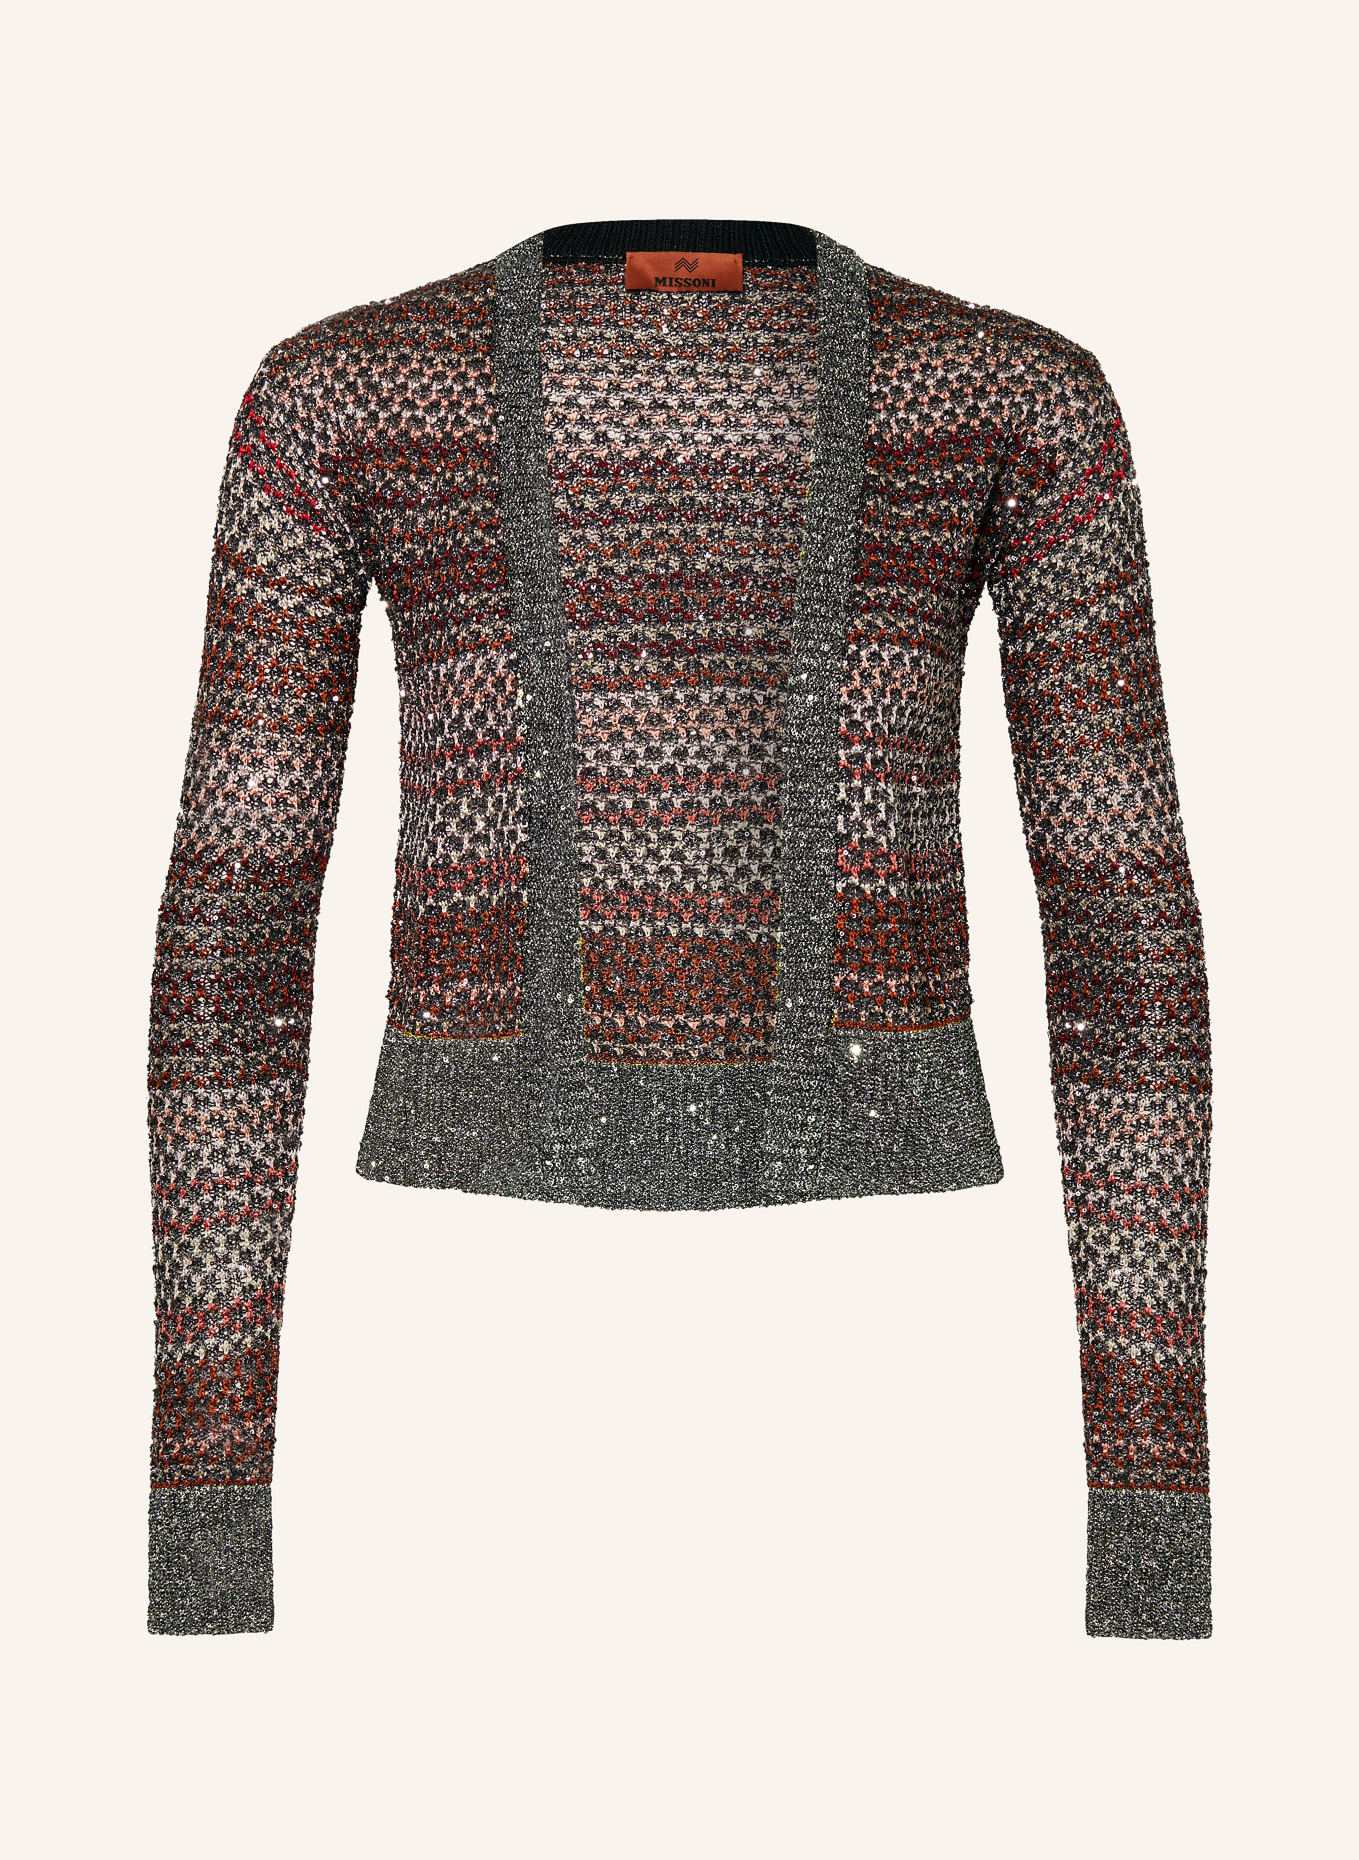 MISSONI Knit cardigan with sequins and glitter thread, Color: BLACK/ RED/ SILVER (Image 1)